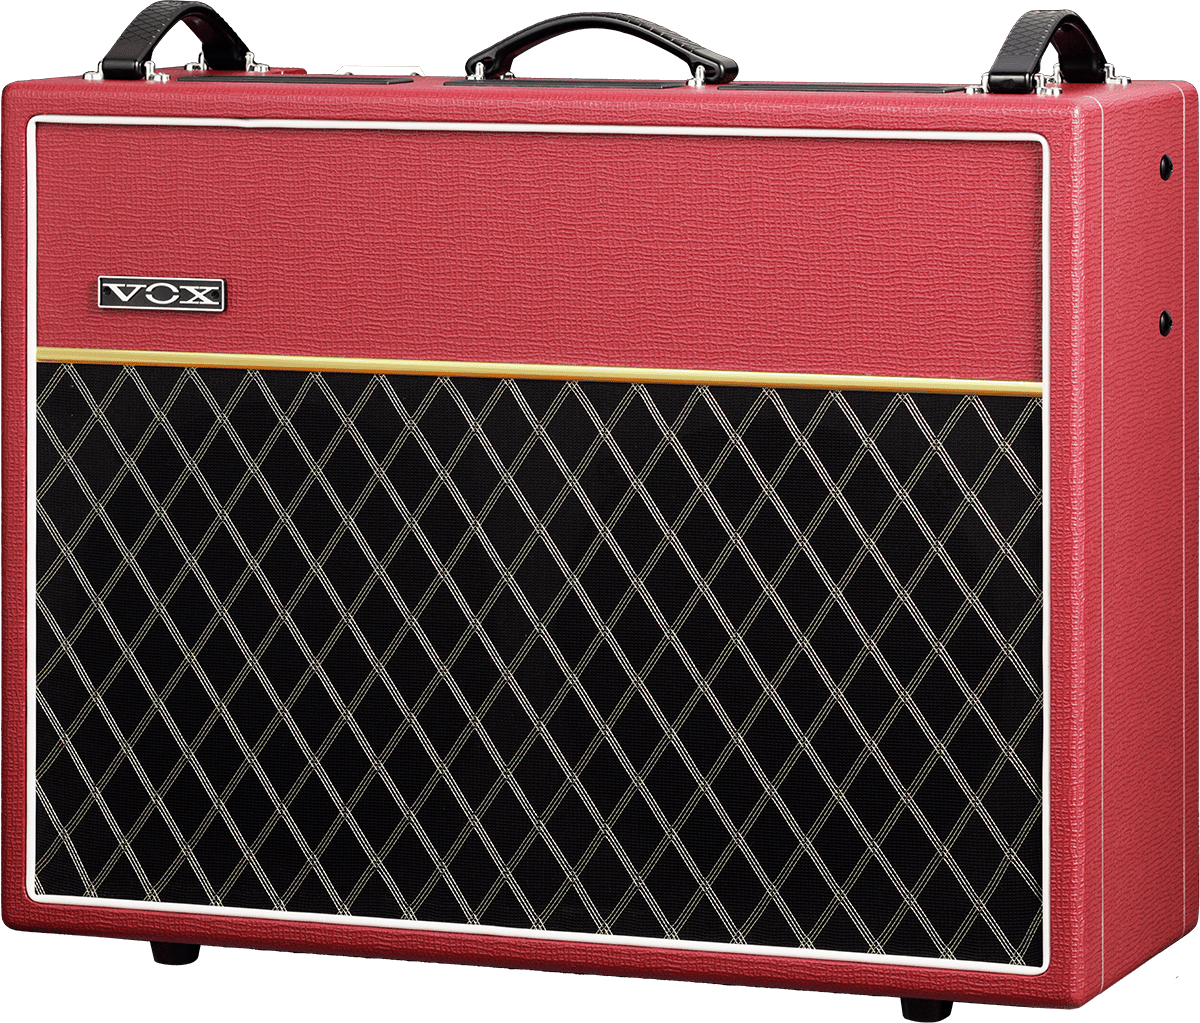 Vox Ac30c1 Limited Edition Classic Vintage Red - Electric guitar combo amp - Variation 3